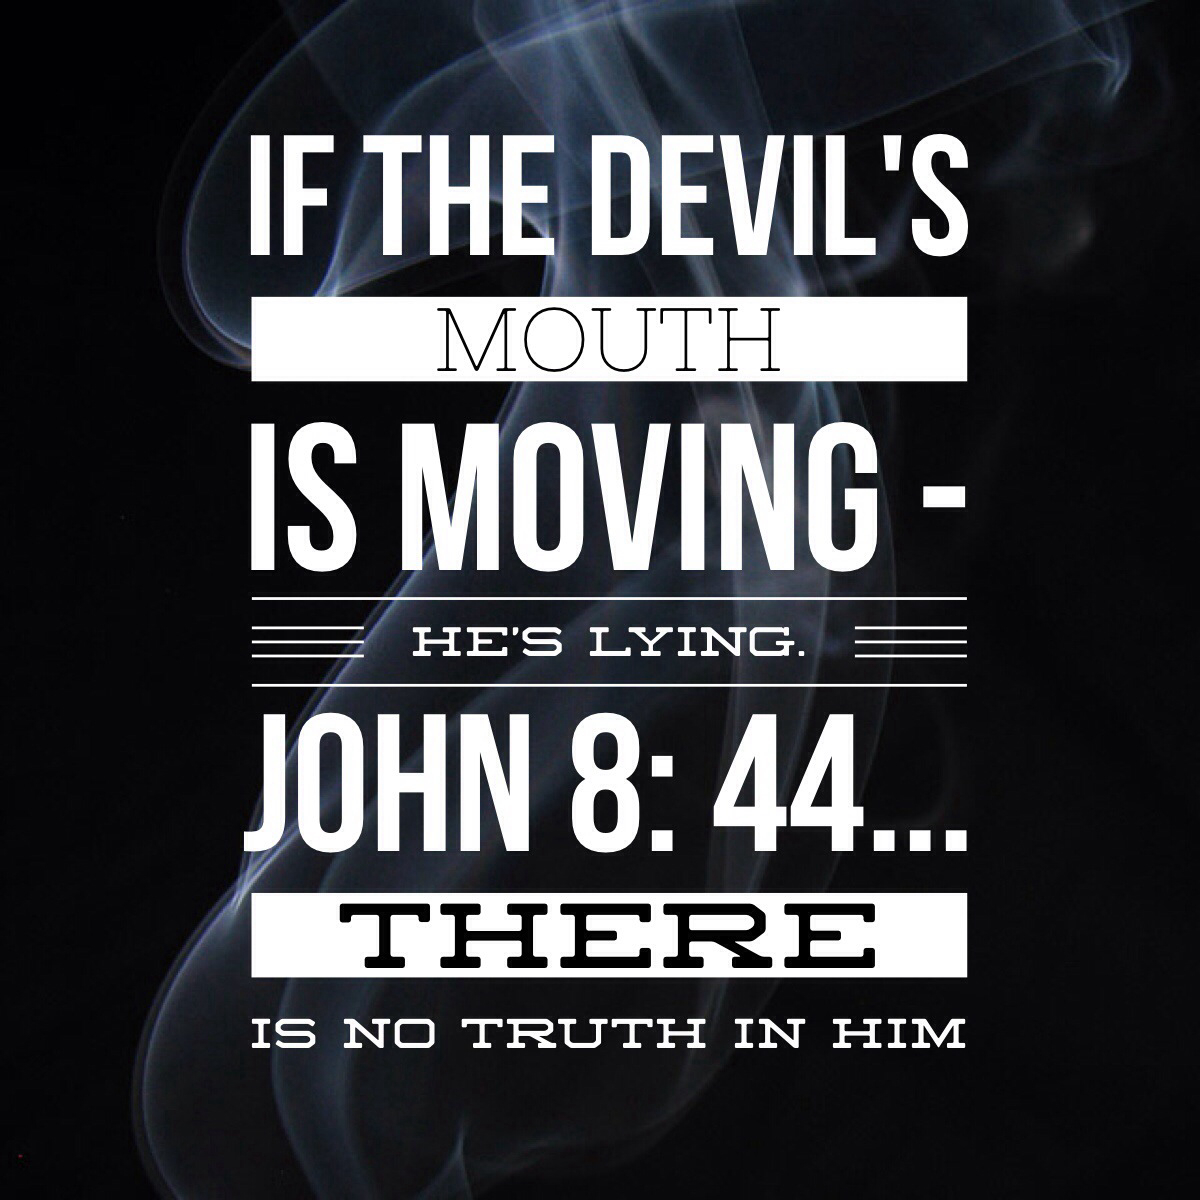 Amazing Devil Quotes Scripture in the world Learn more here 